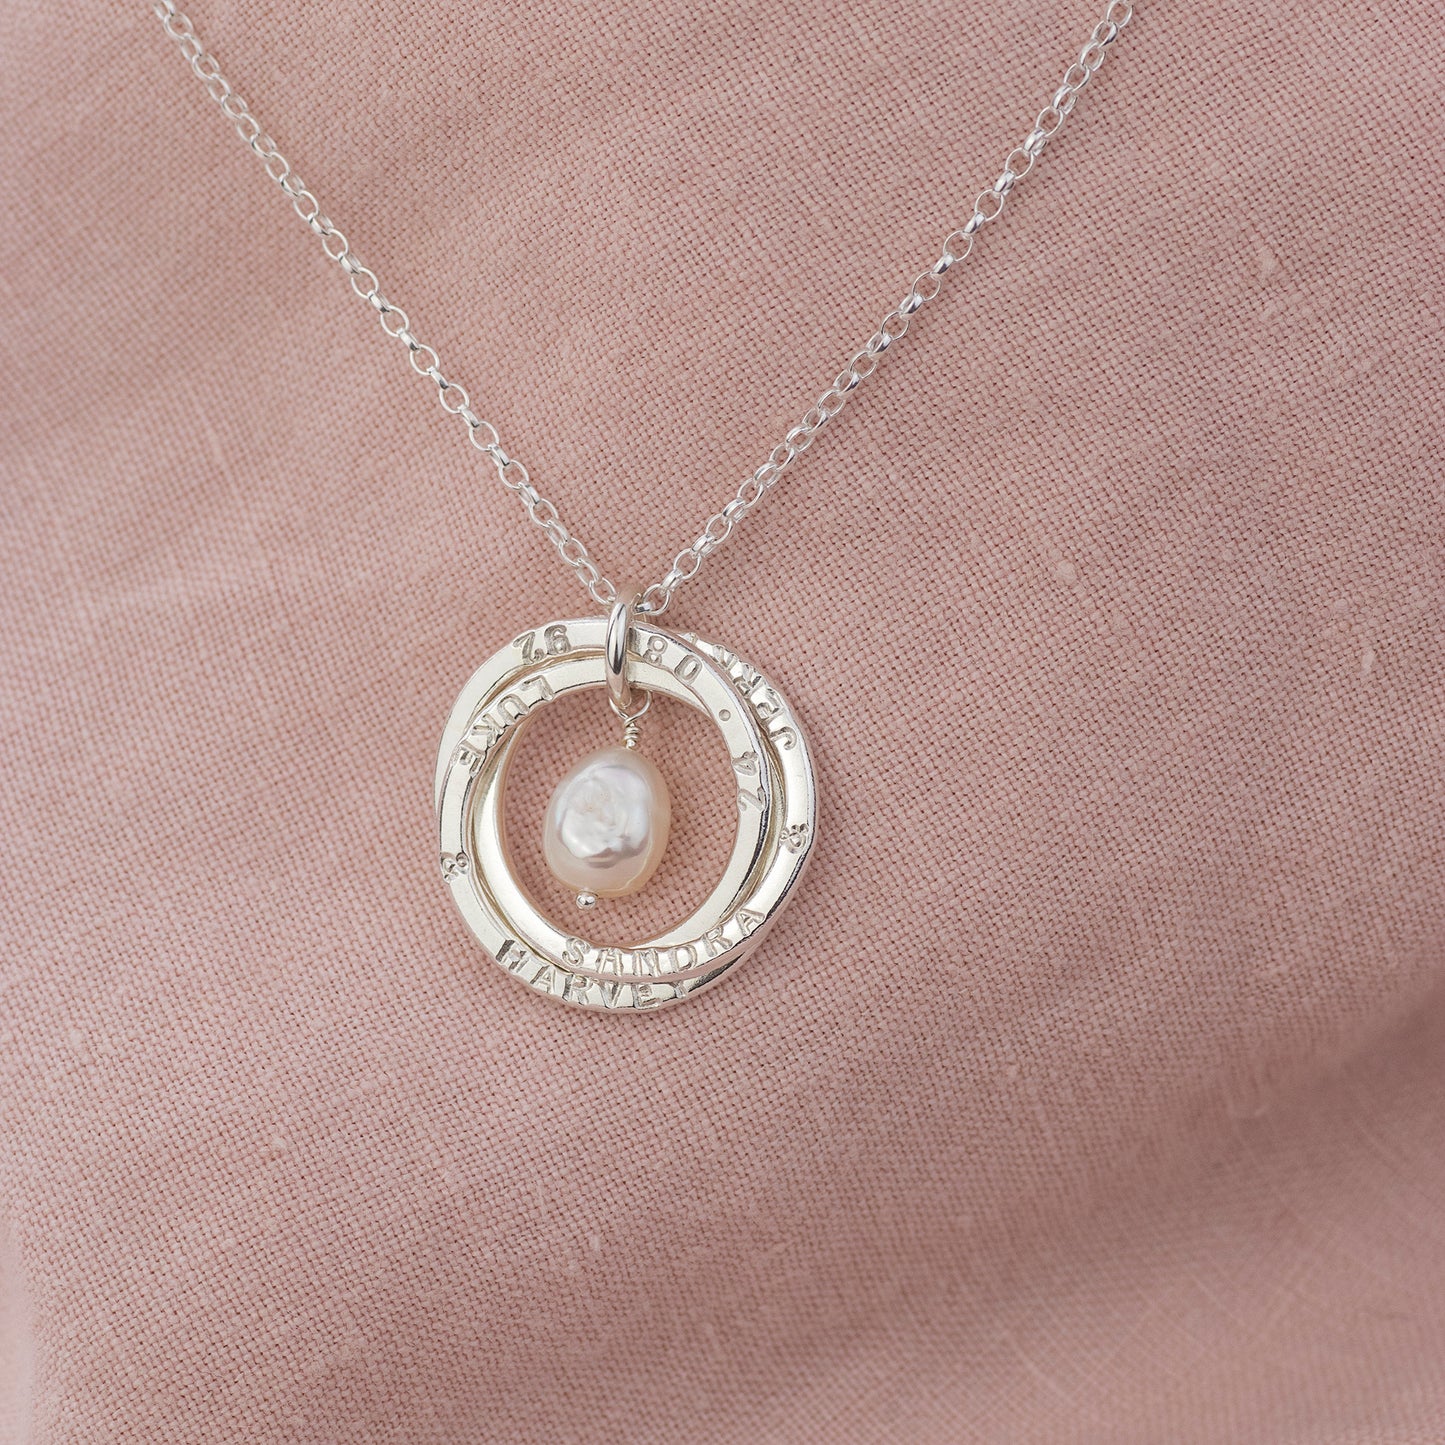 Personalised Pearl Wedding Anniversary Necklace - 30th Anniversary Gift